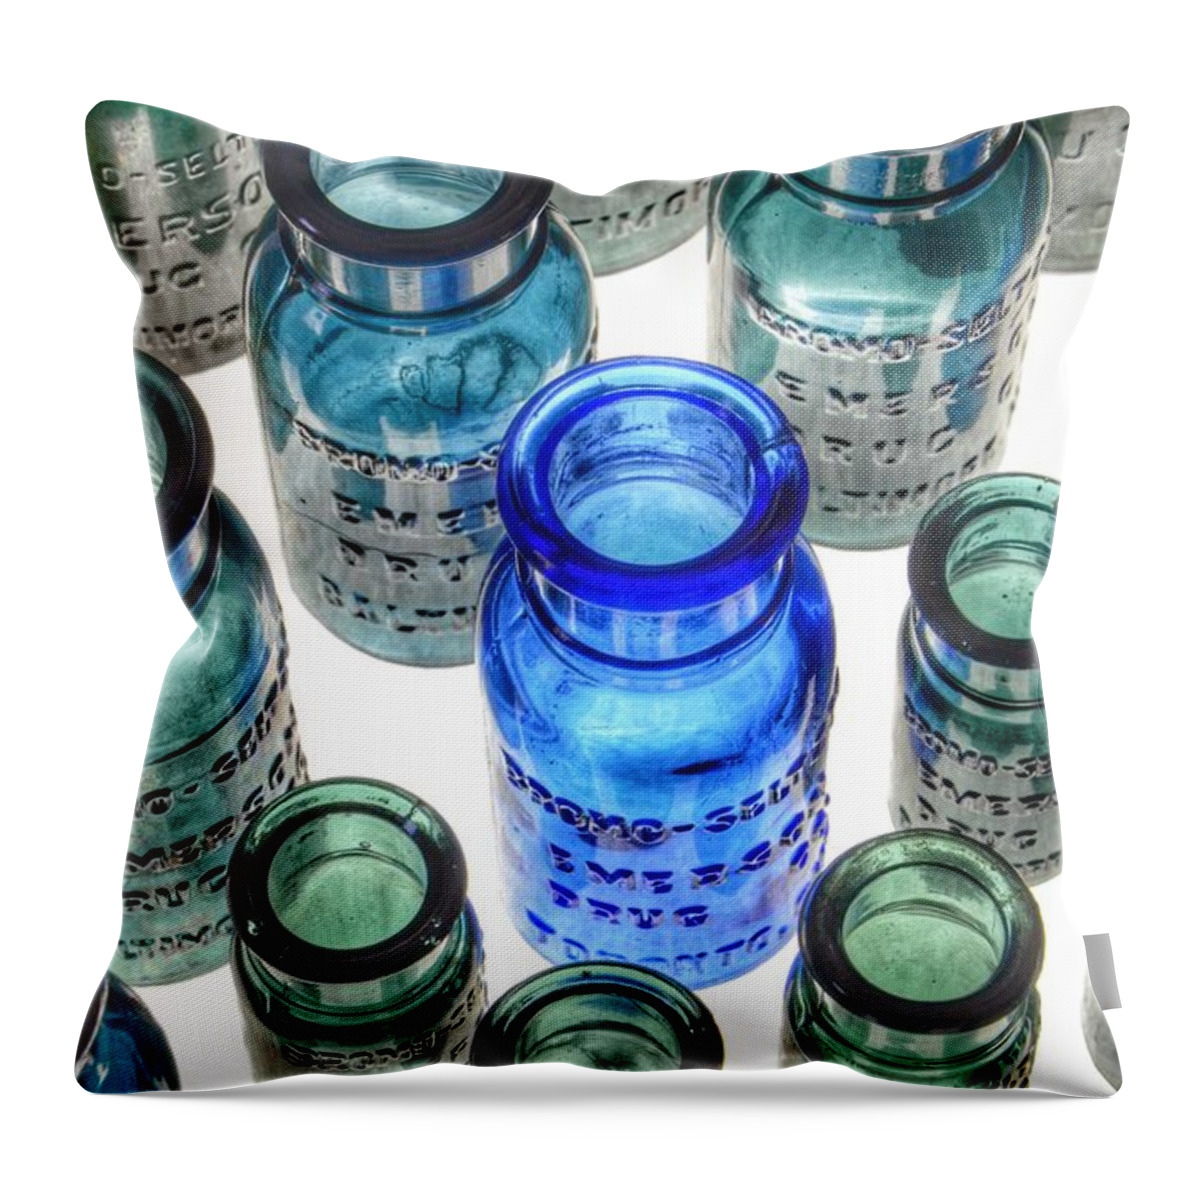 Bromo Seltzer Vintage Glass Bottles Throw Pillow featuring the photograph Bromo Seltzer Vintage Glass Bottles Collection - Rare Greens #1 by Marianna Mills